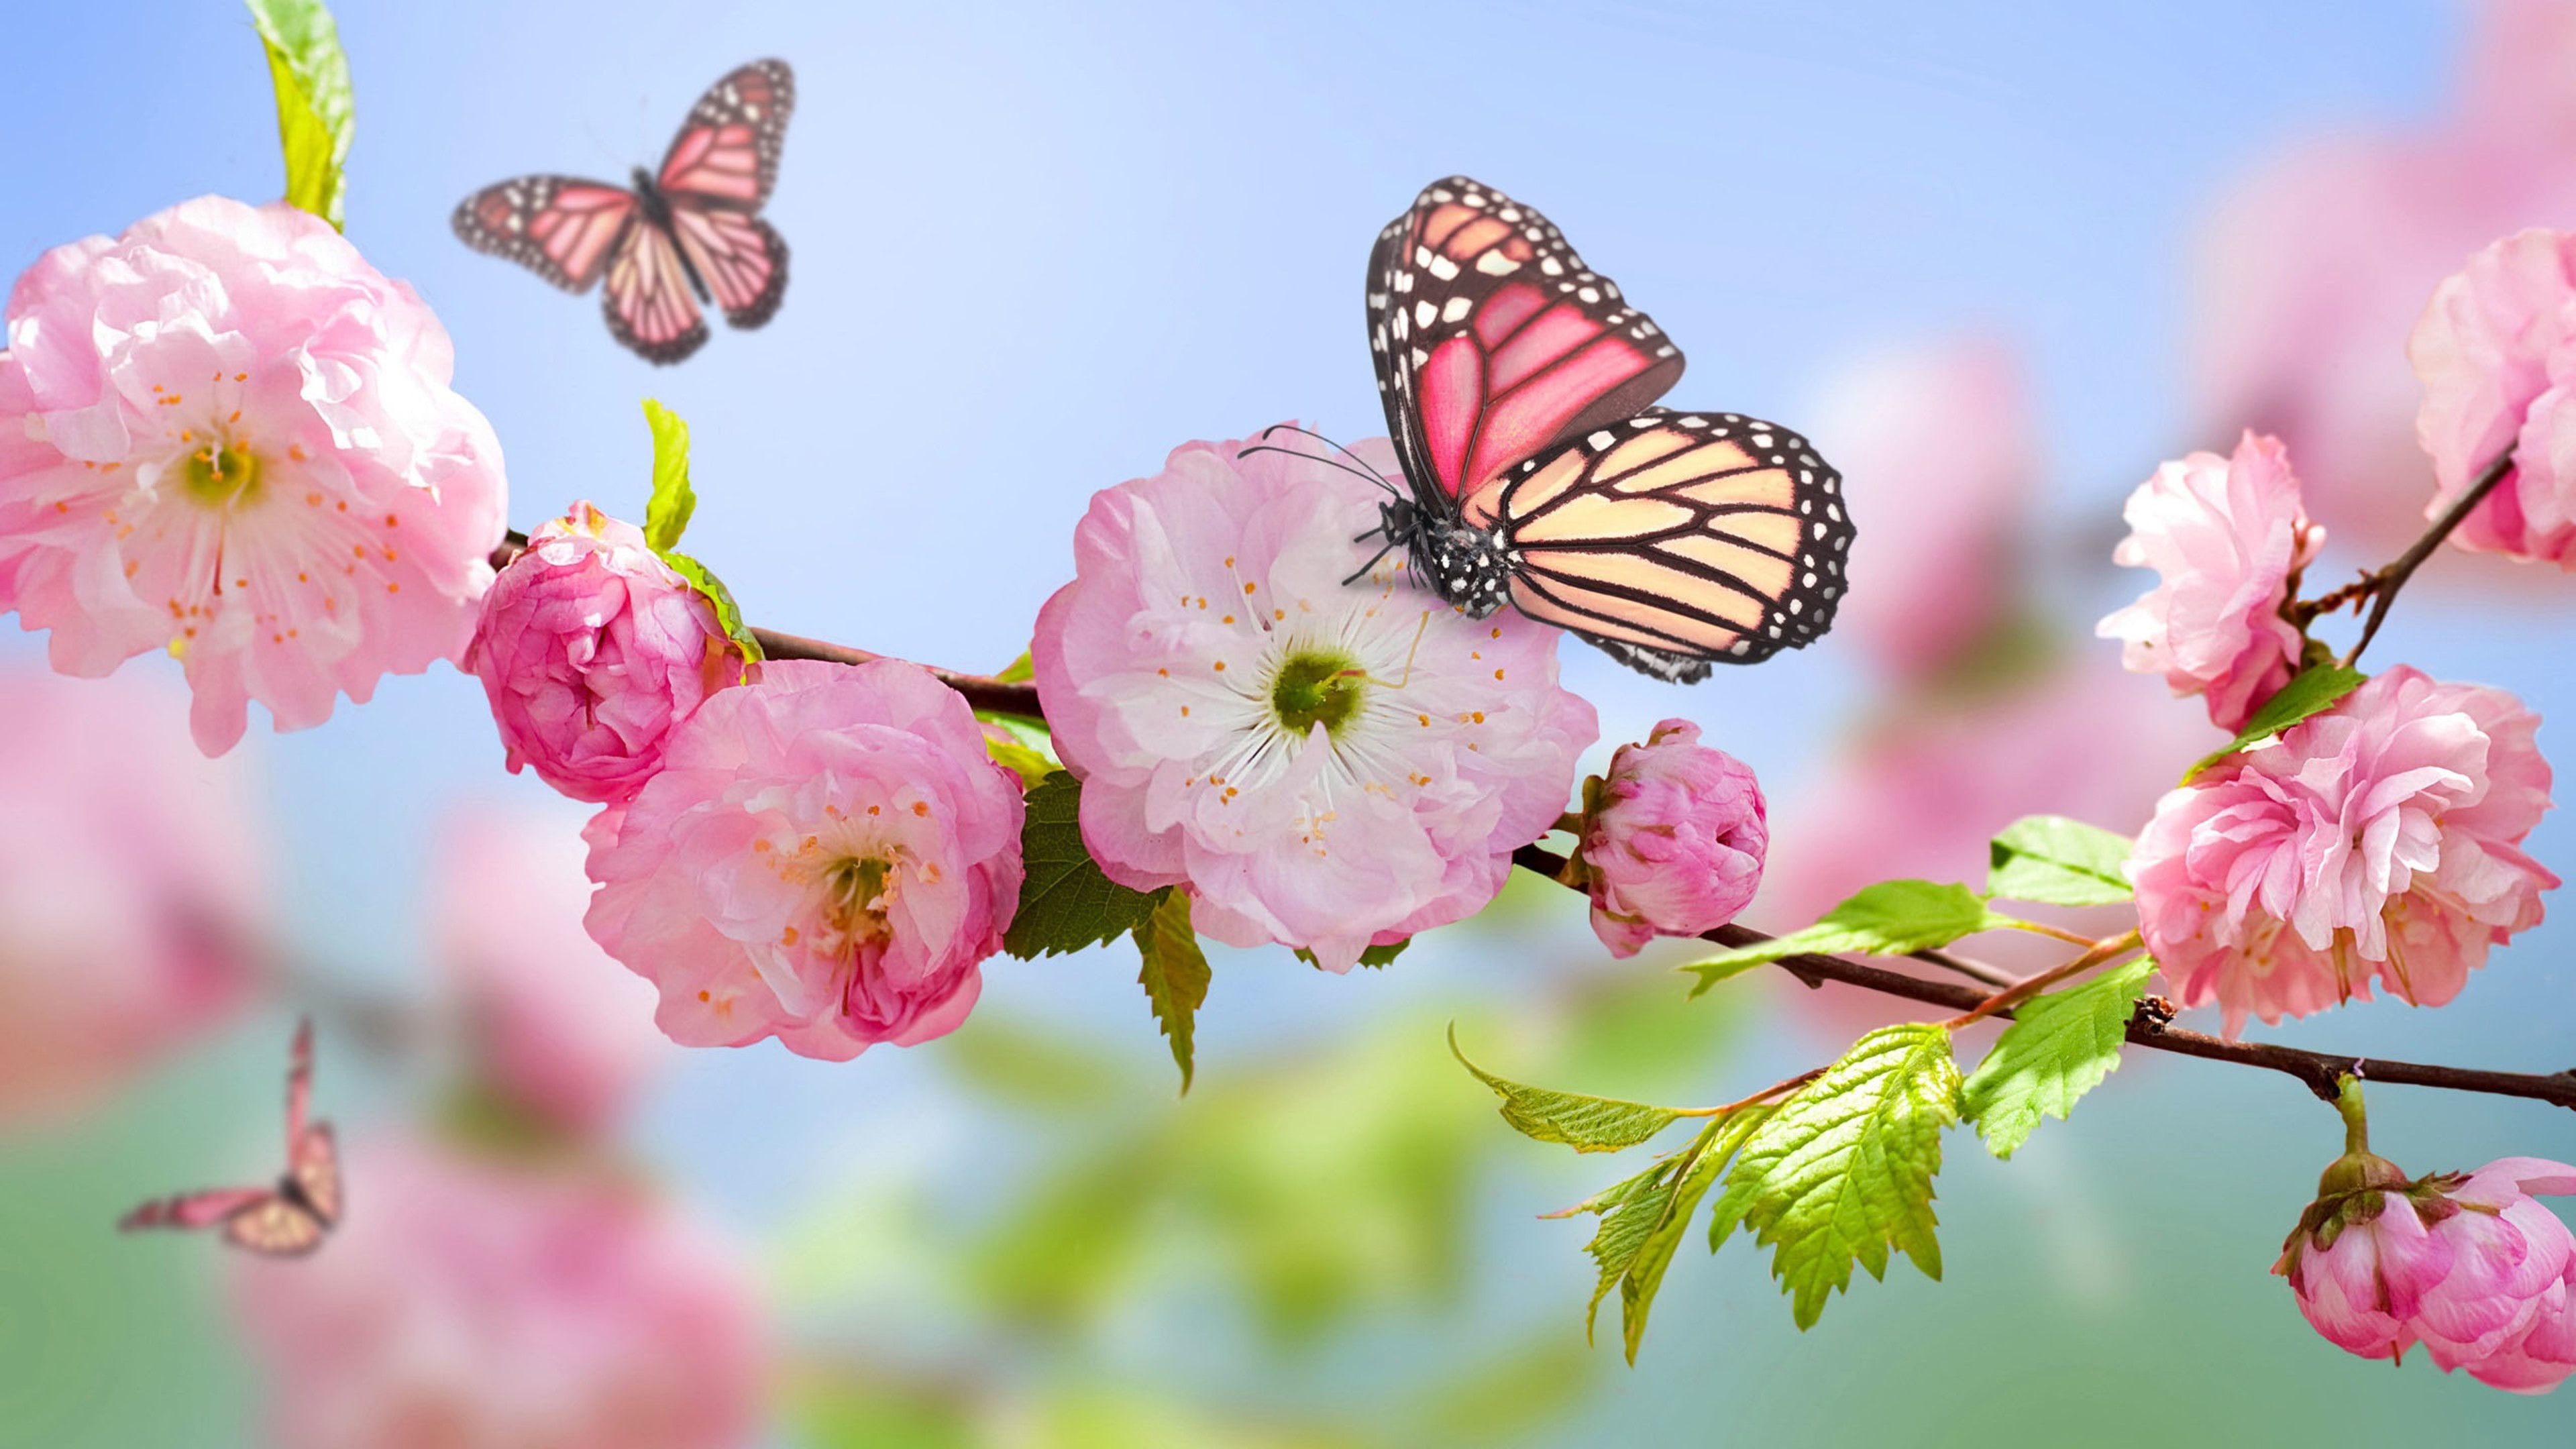 3840x2160 Wallpaper Download  Pink butterfly on the blossom trees -.  Wonderful macro wallpapers. download beautiful HD Wallpaper 1080p 2160p UHD  4K HD, ...